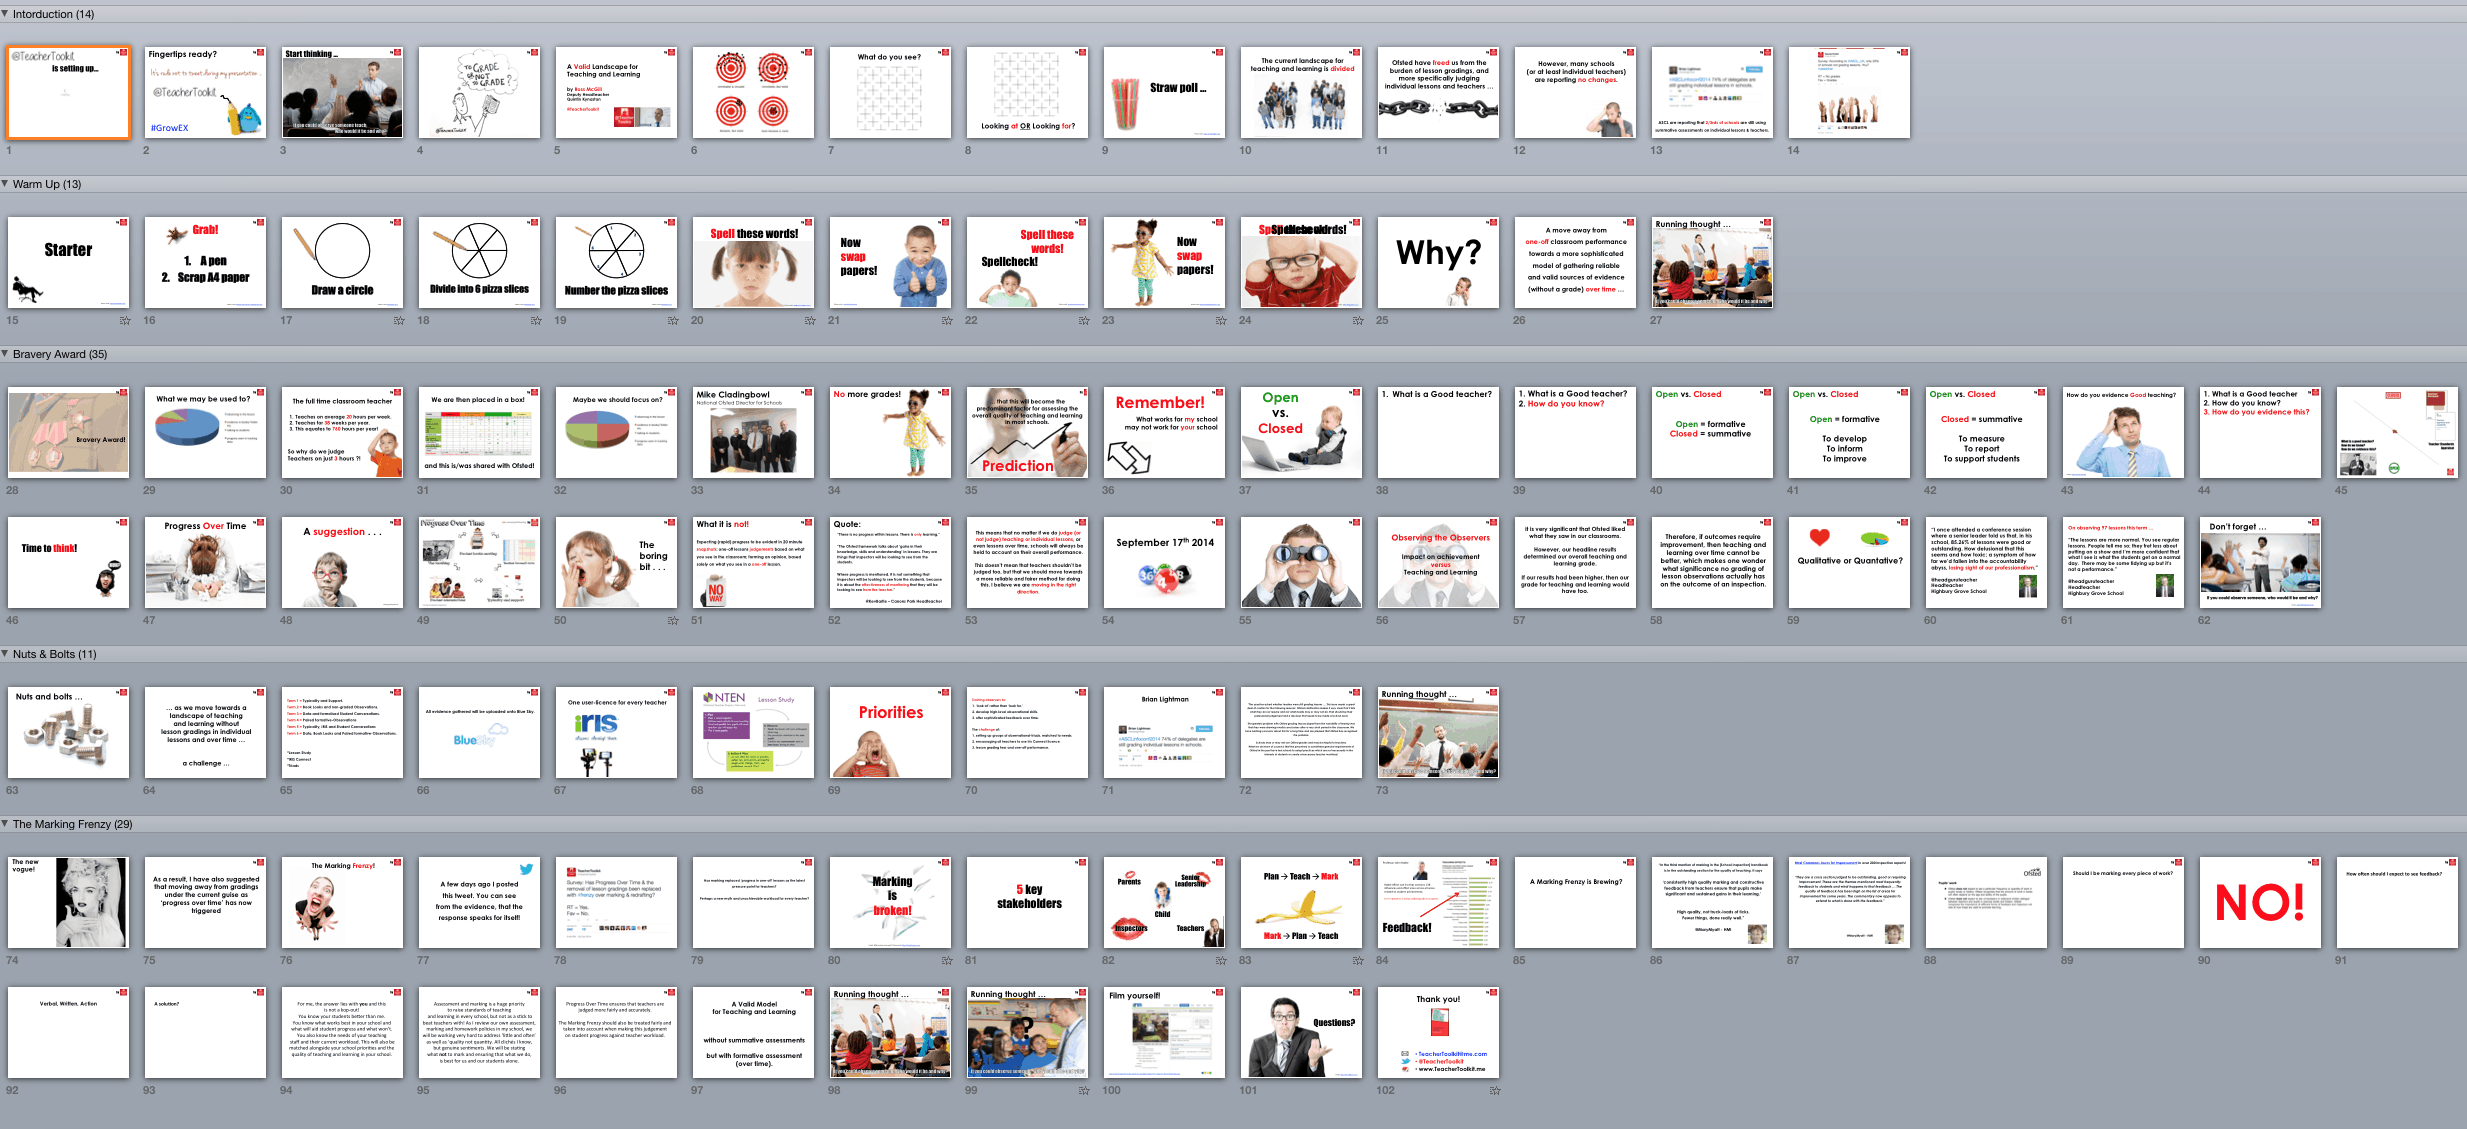 A Valid Landscape for Teaching and Learning by @TeacherToolkit